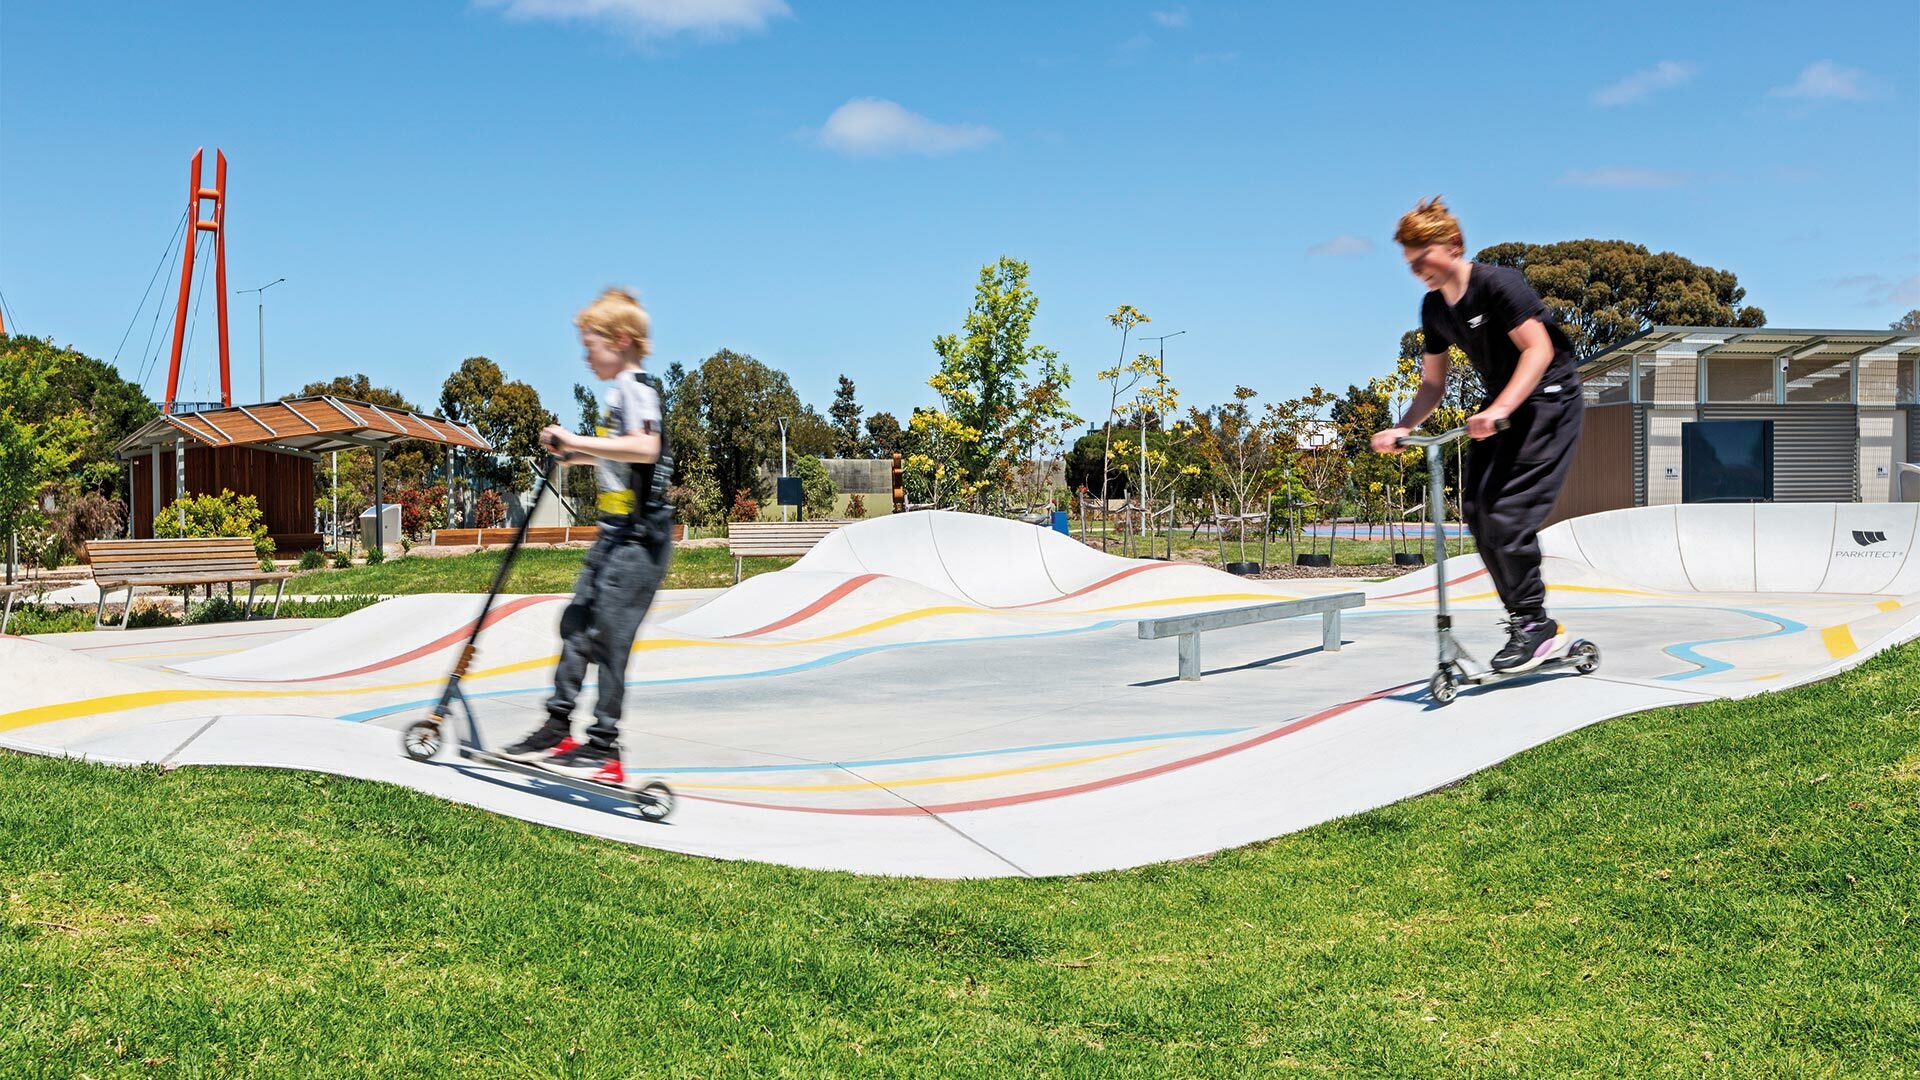 Two children riding scooters on a precast concrete pump track from Parkitect Australia